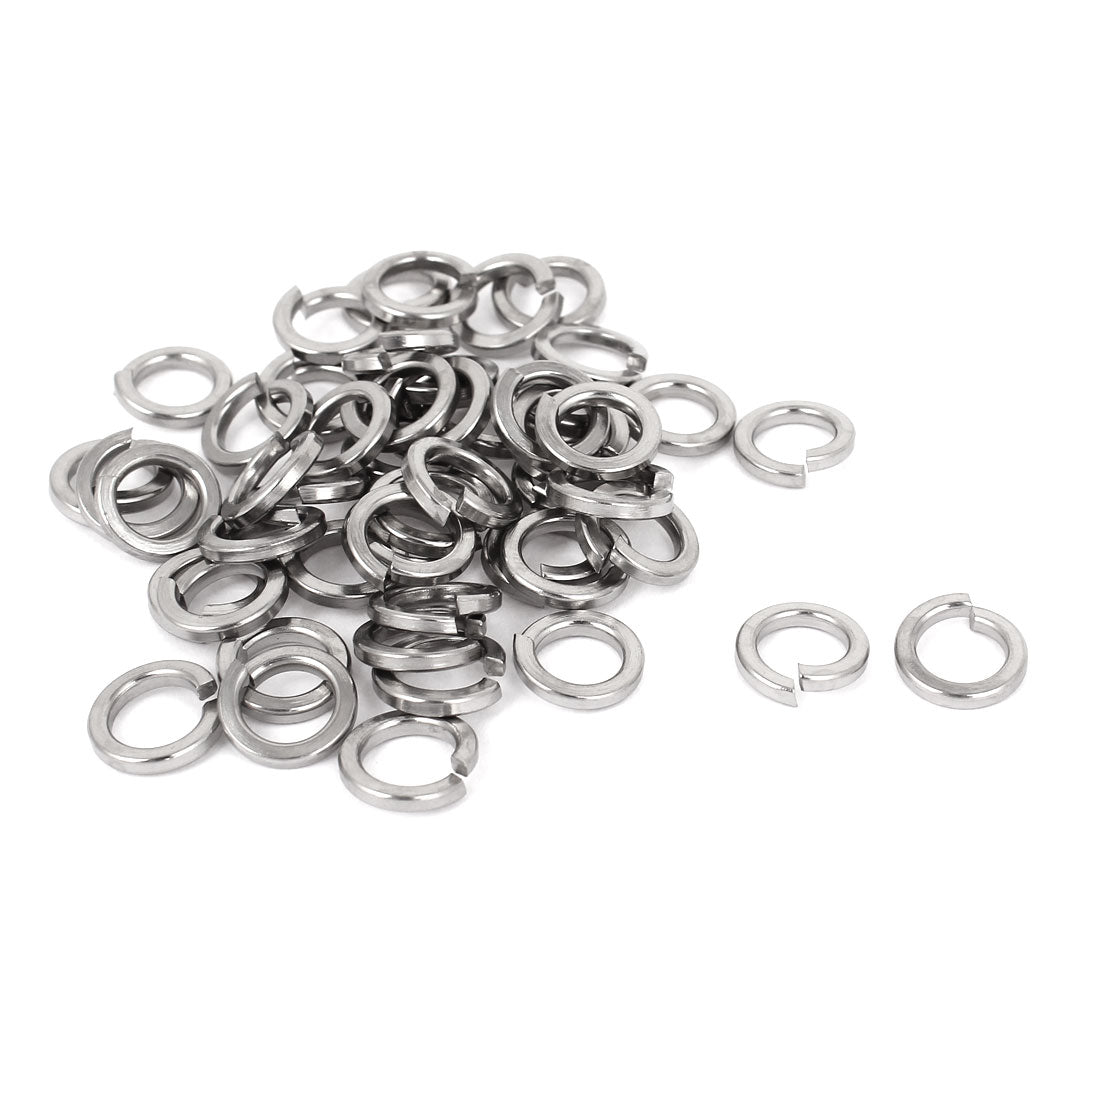 uxcell Uxcell 50pcs 304 Stainless Steel Split Lock Spring Washers 5/16" Screw Spacer Pad